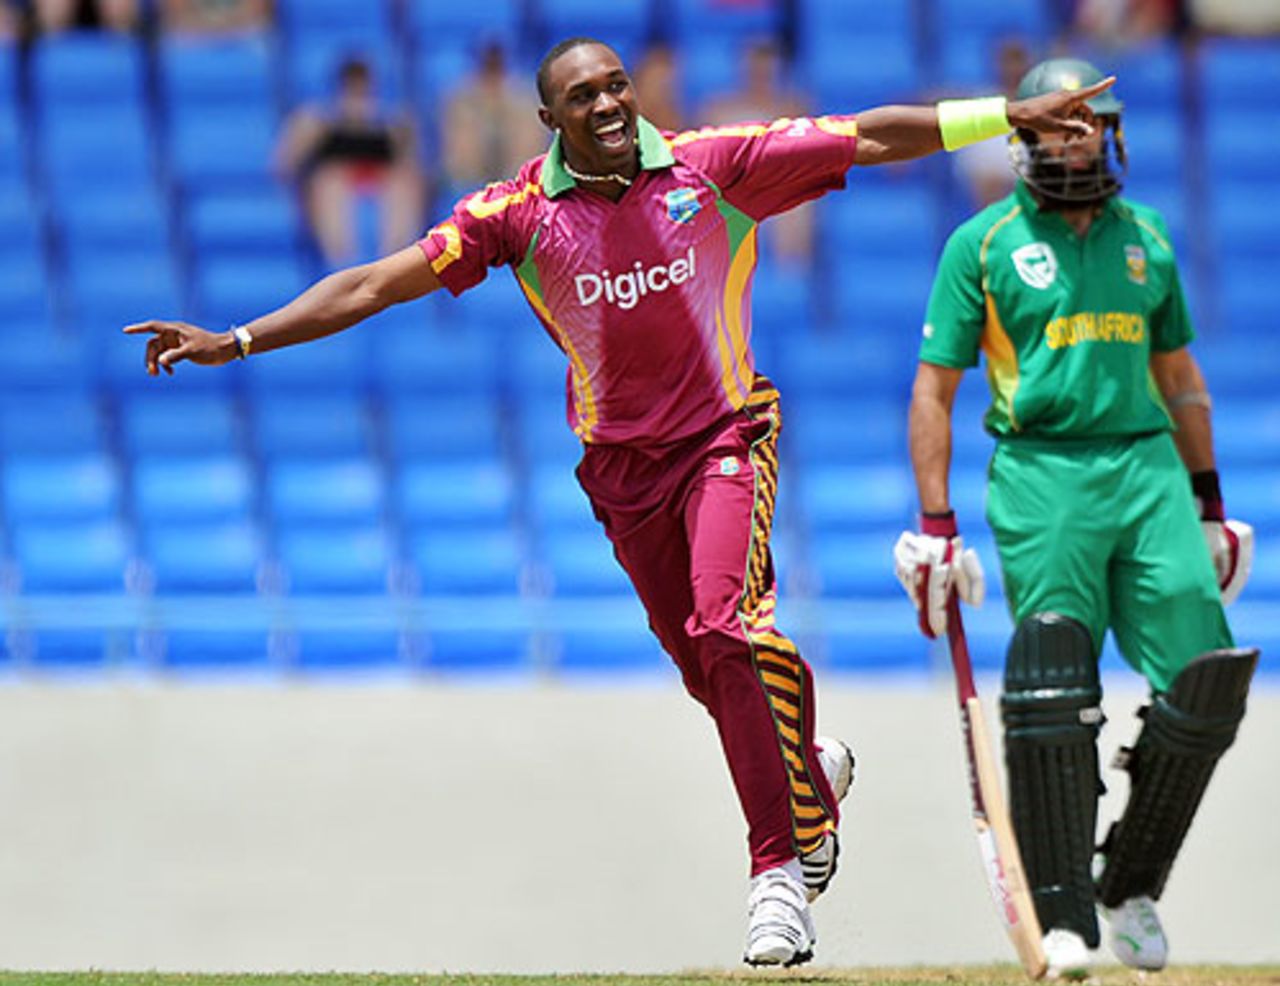 Dwayne Bravo struck twice to remove Graeme Smith and Jacques Kallis, West Indies v South Africa, 1st ODI, Antigua, May 22, 2010